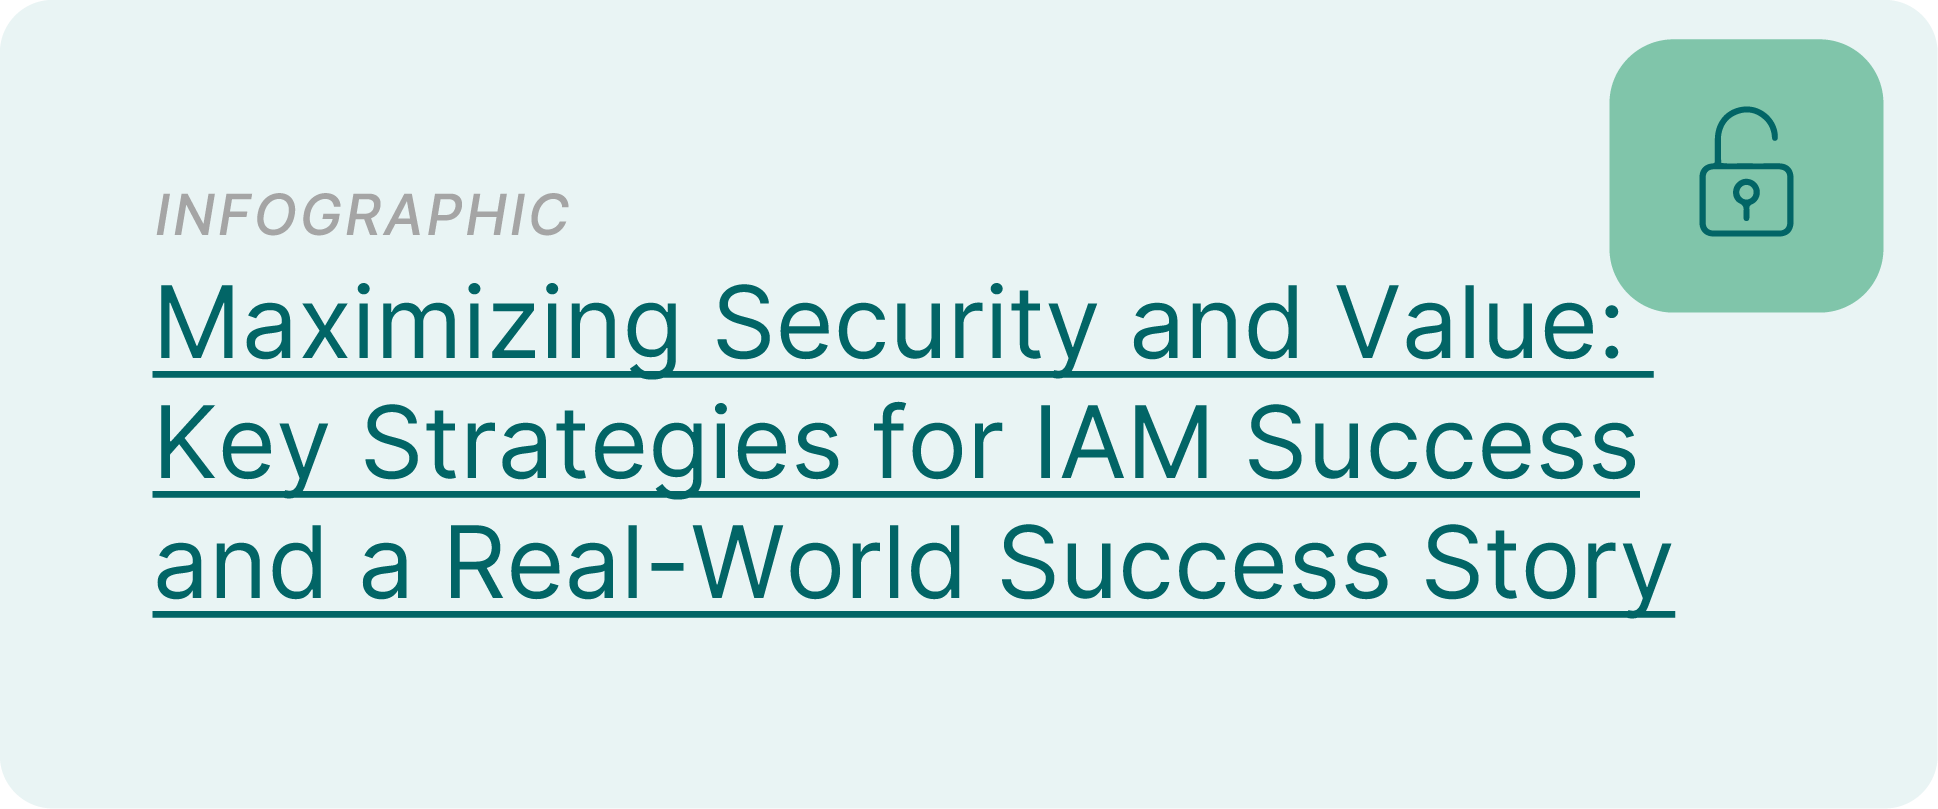 Infographic Maximizing Security and Value: Key Strategies for IAM Success and a Real-World Success Story